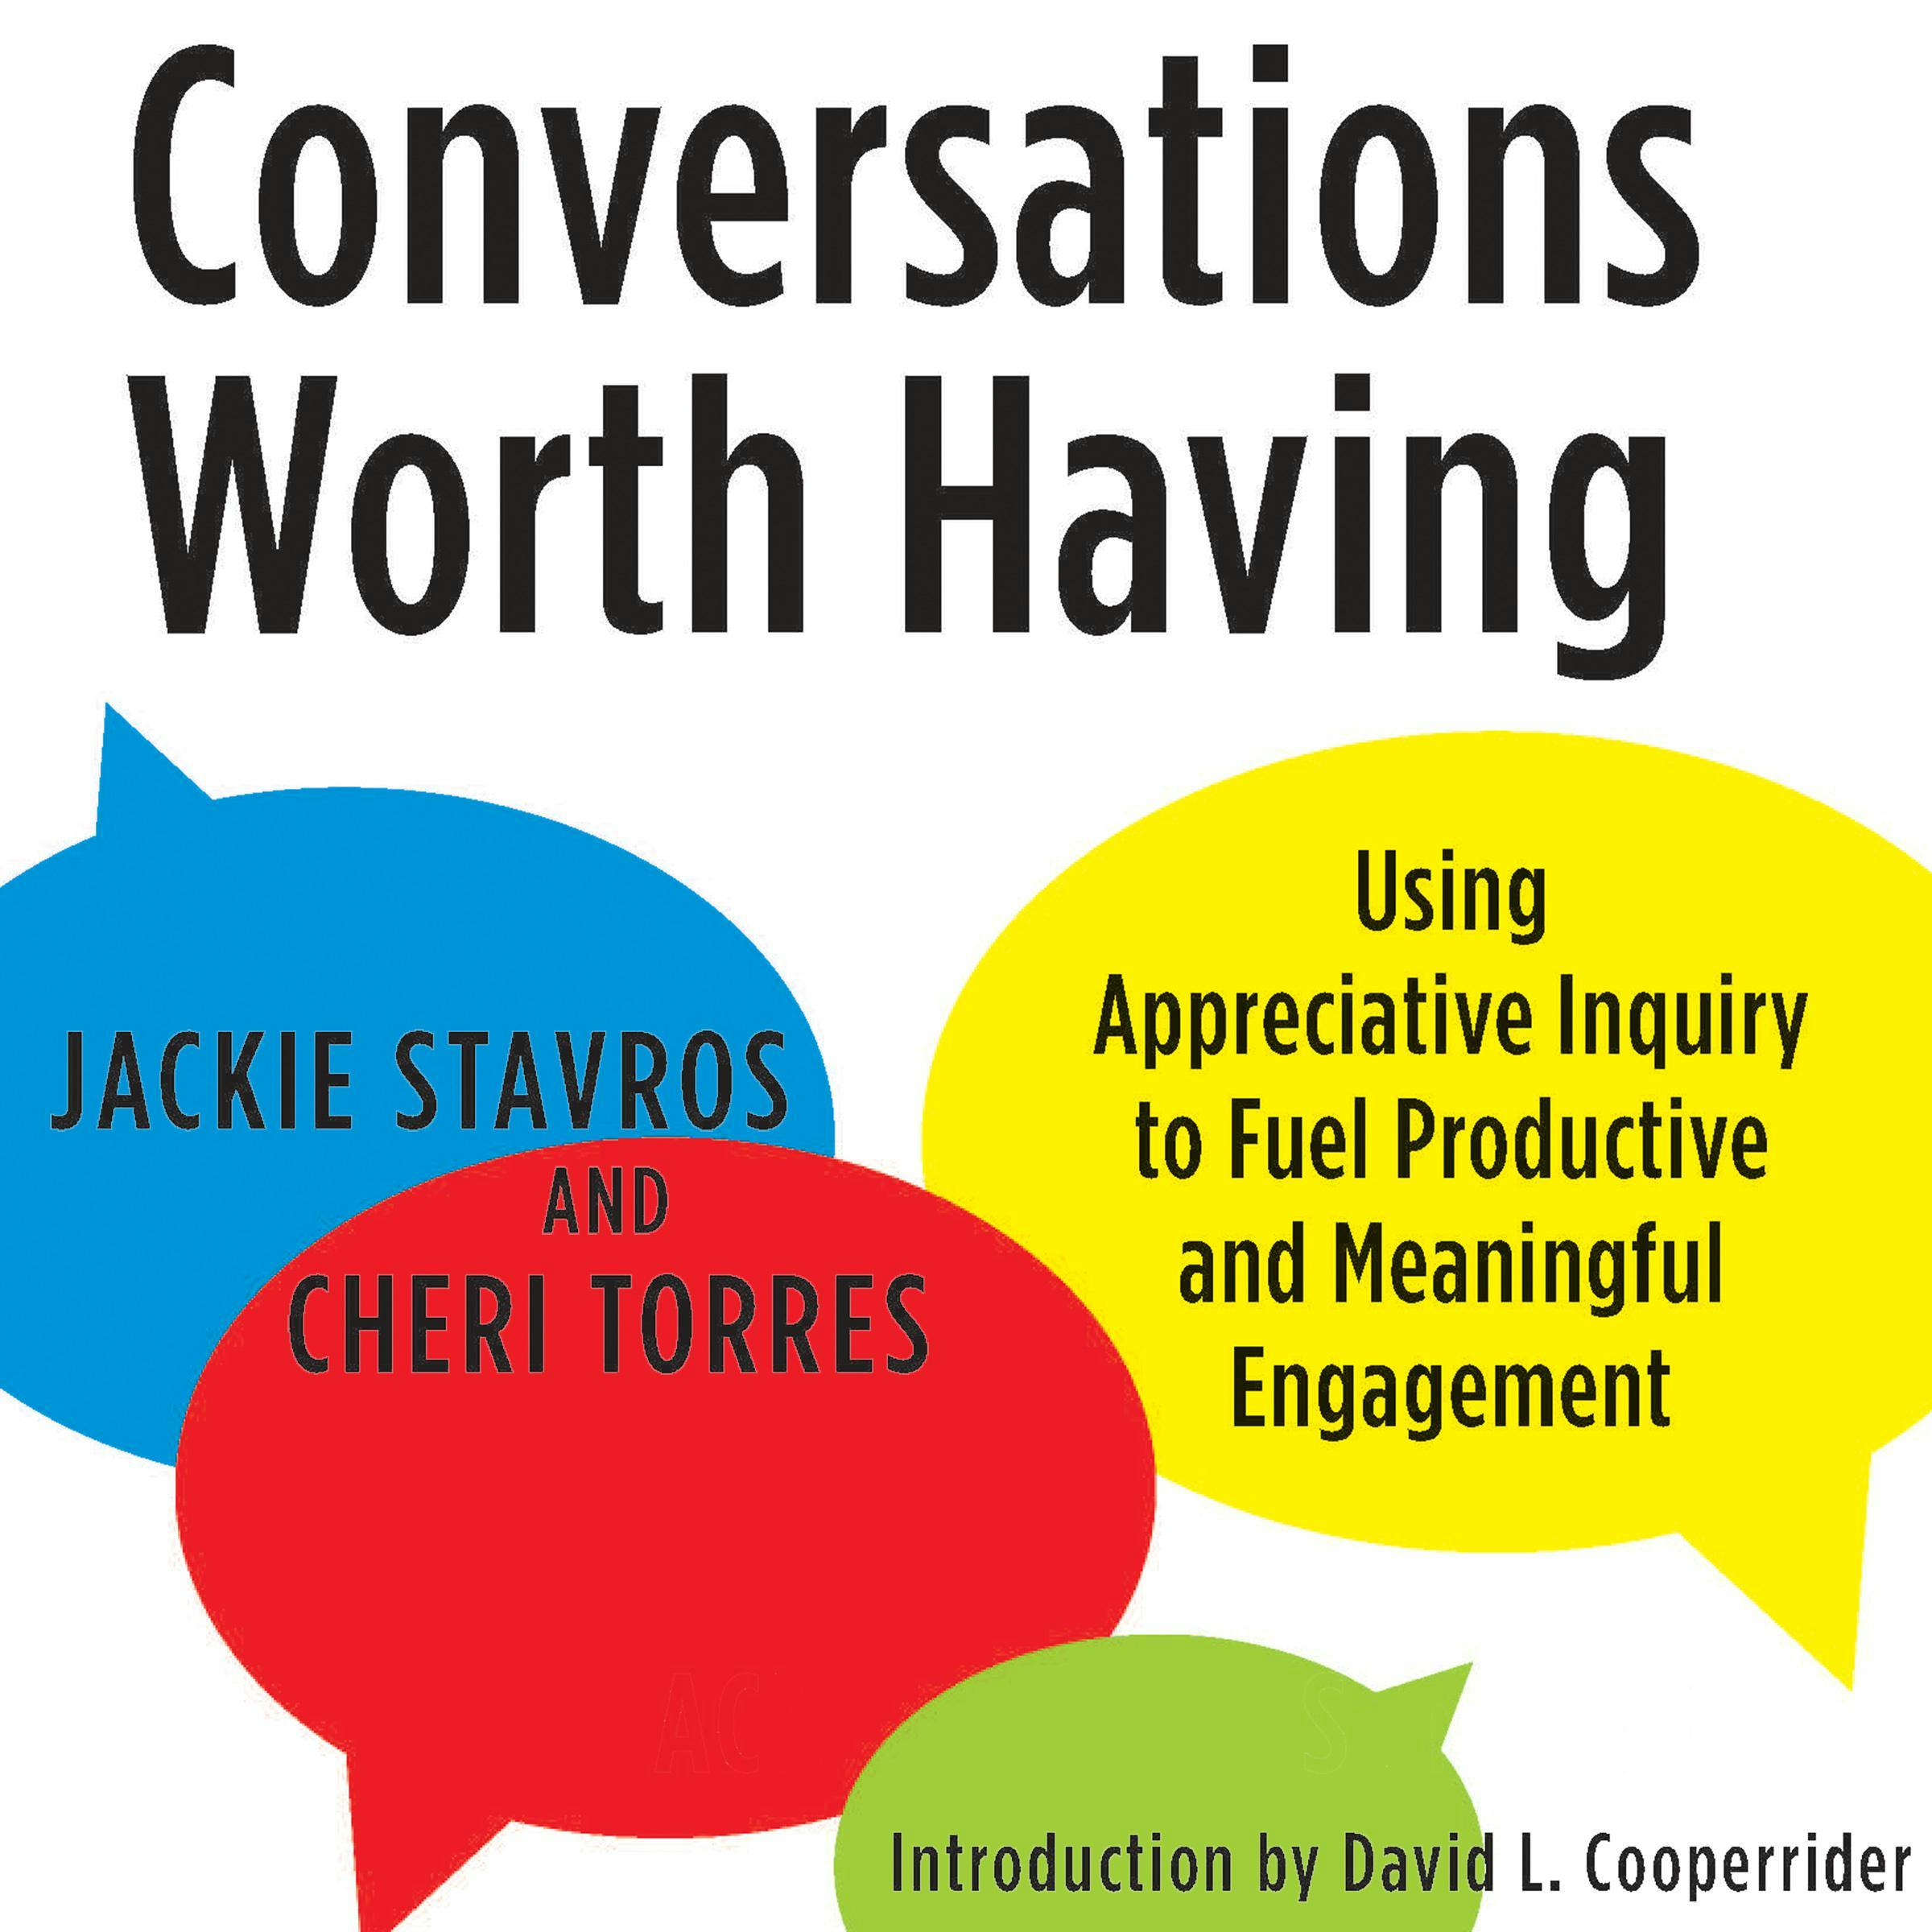 Conversations Worth Having: Using Appreciative Inquiry to Fuel Productive and Meaningful Engagement - David L. Cooperrider, Cheri Torres, Jacqueline M. Stavros